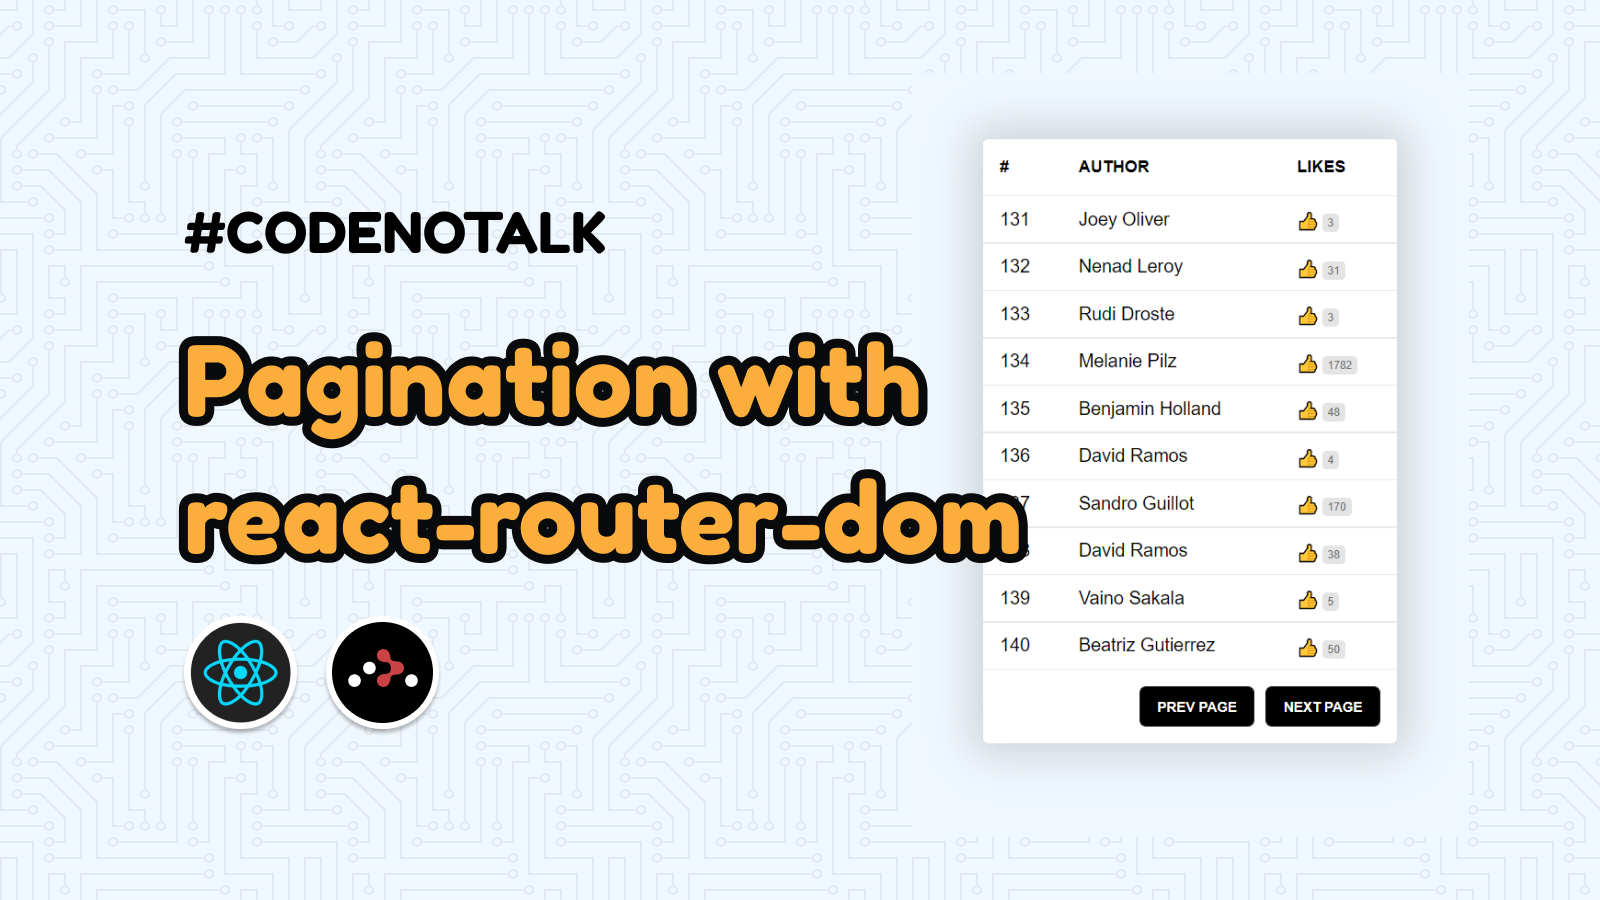 CODENOTALK - Coding pagination with react-router-dom